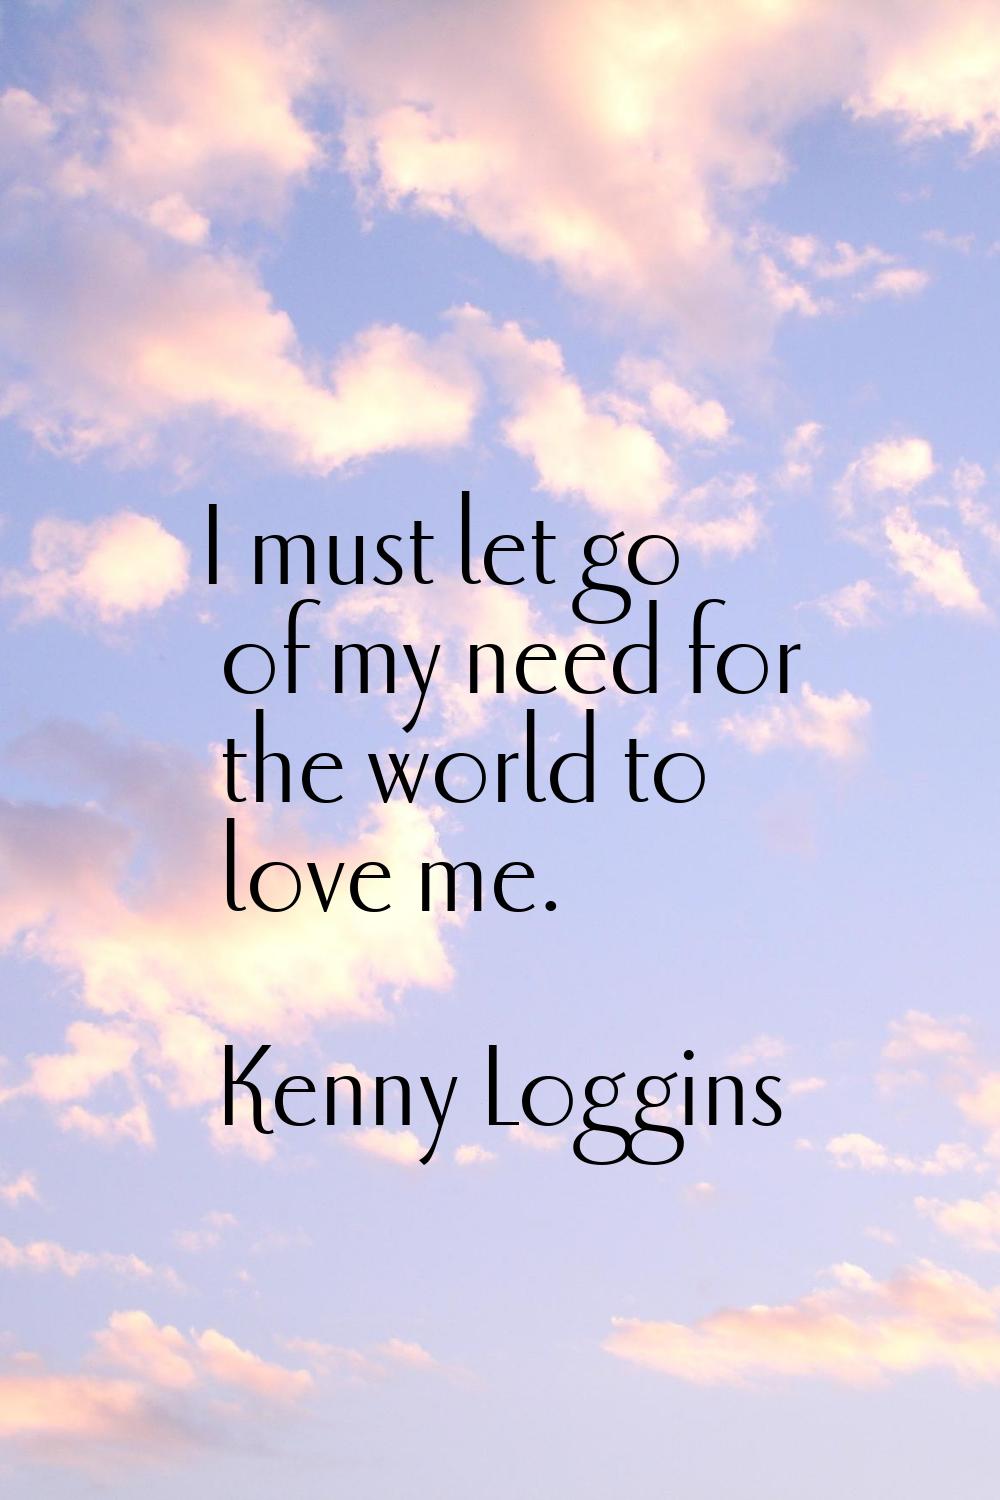 I must let go of my need for the world to love me.